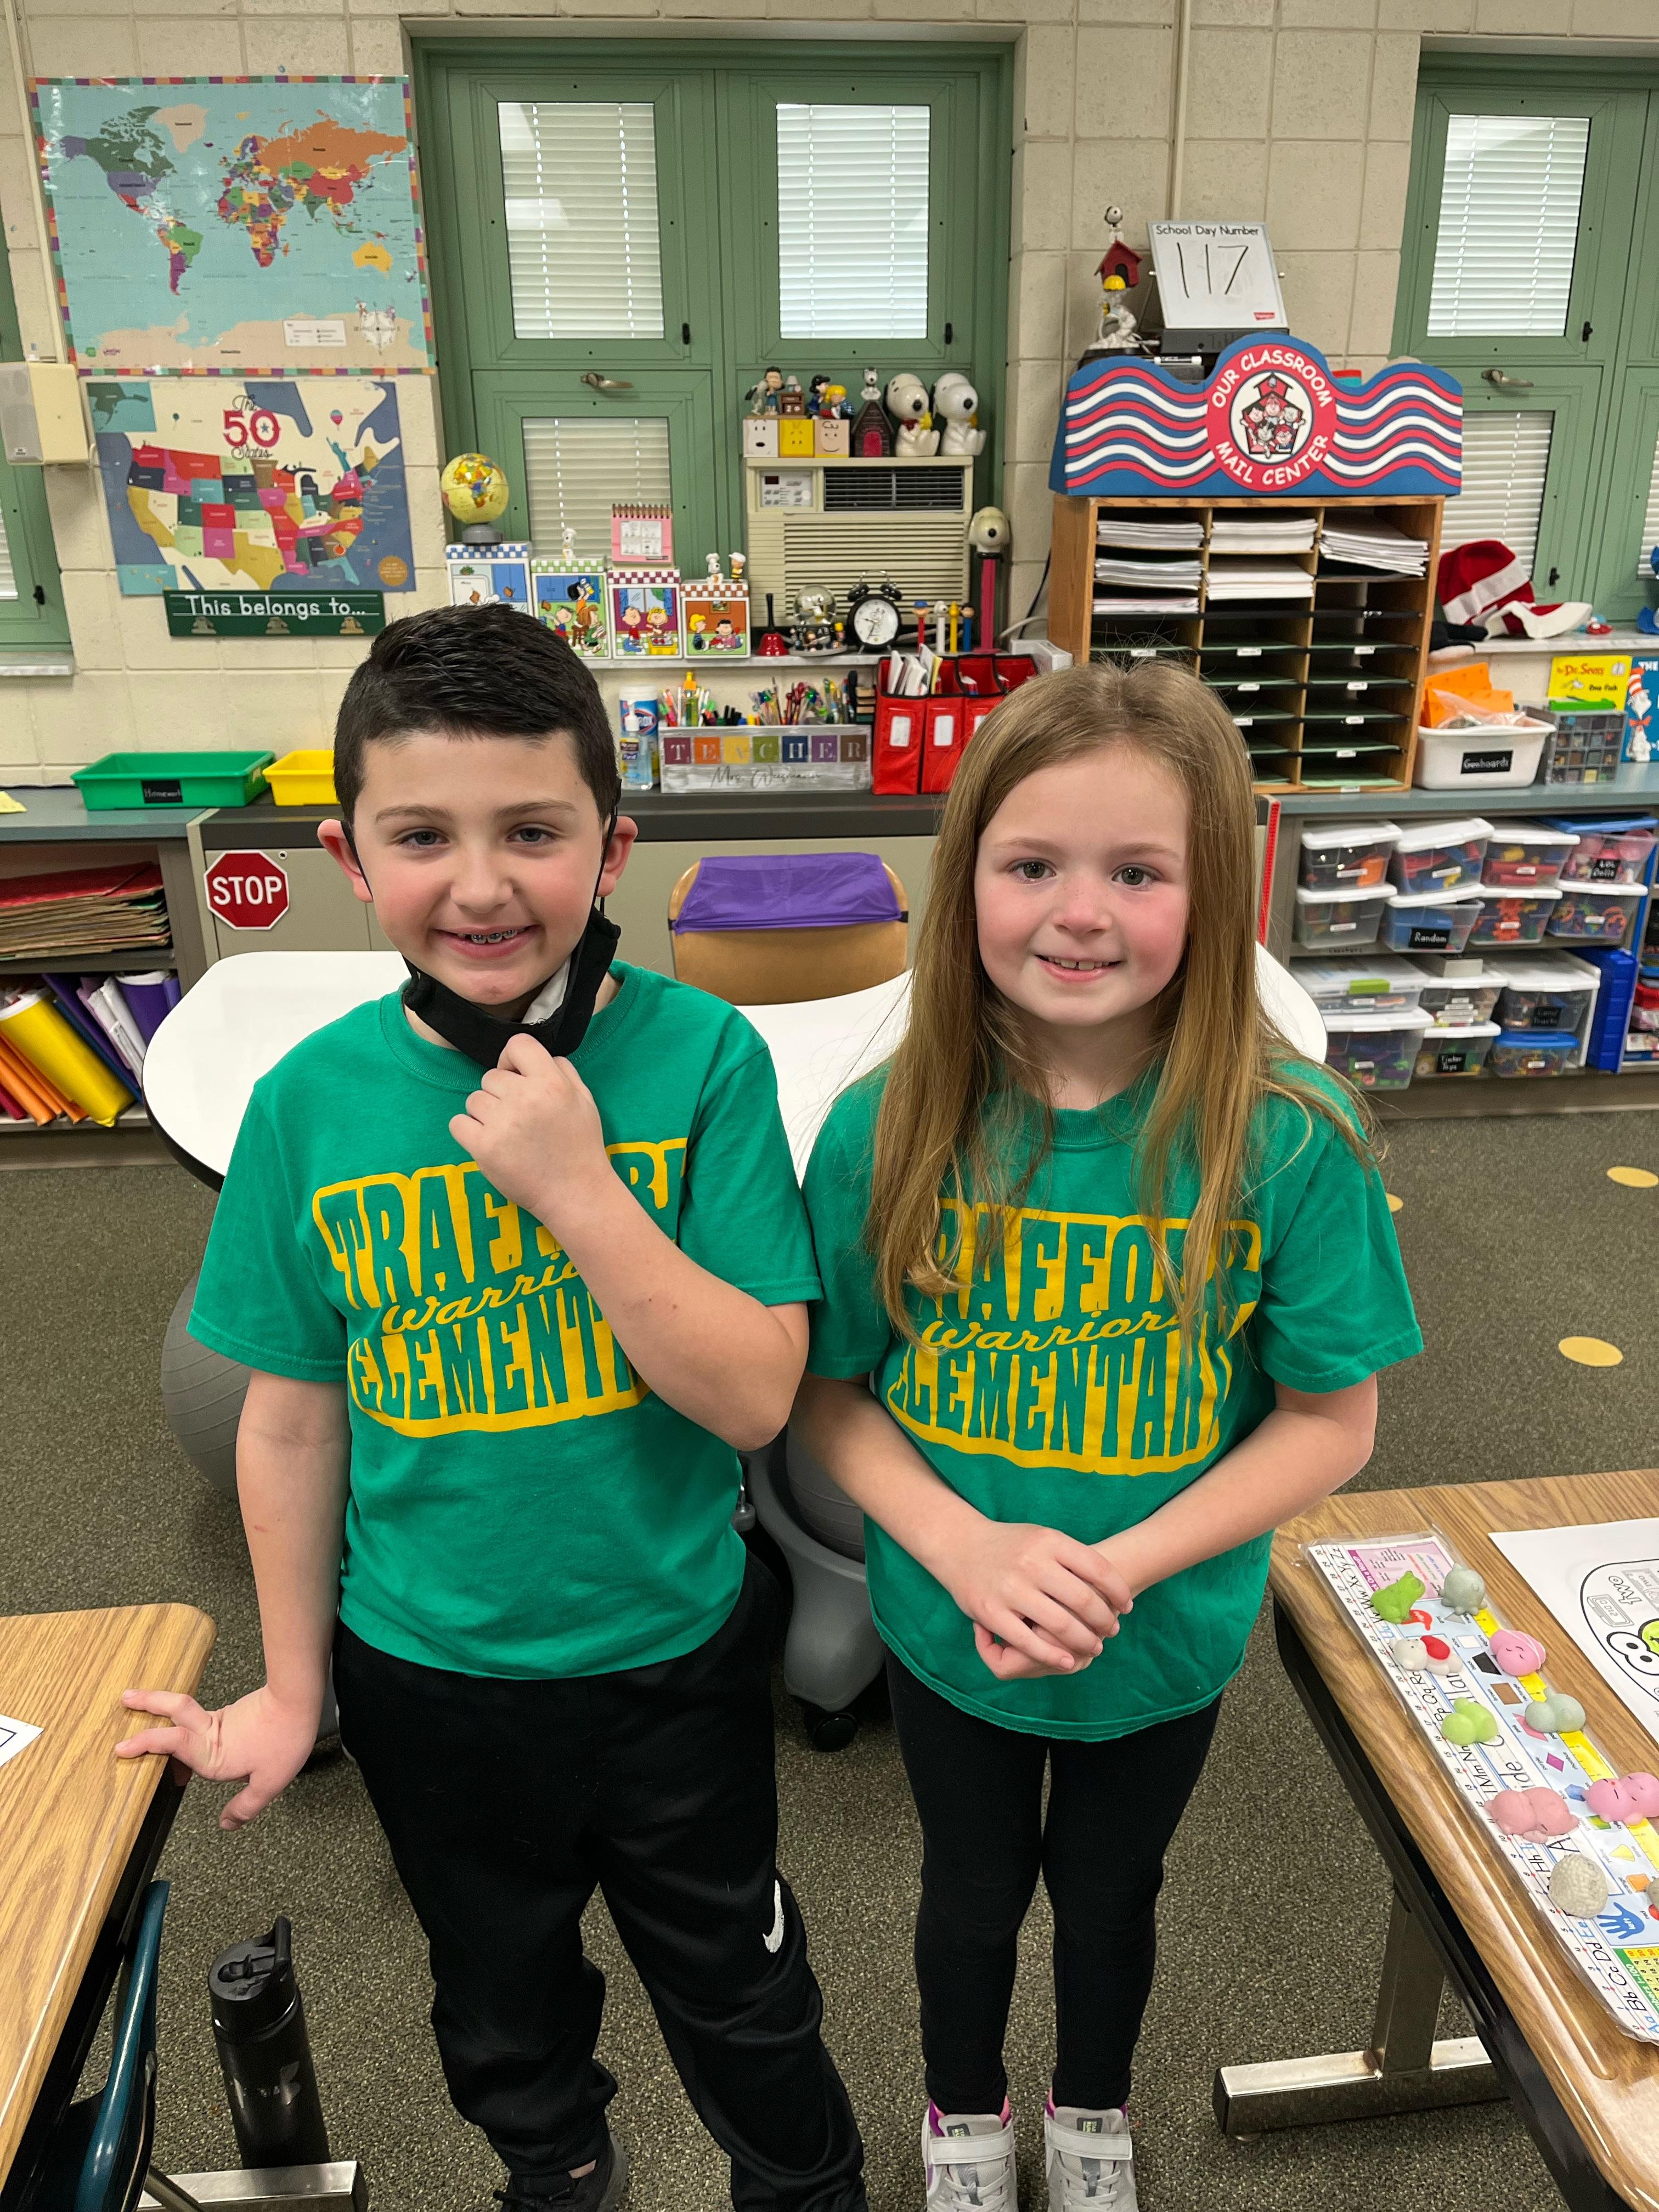 students dressed alike on Twos-day